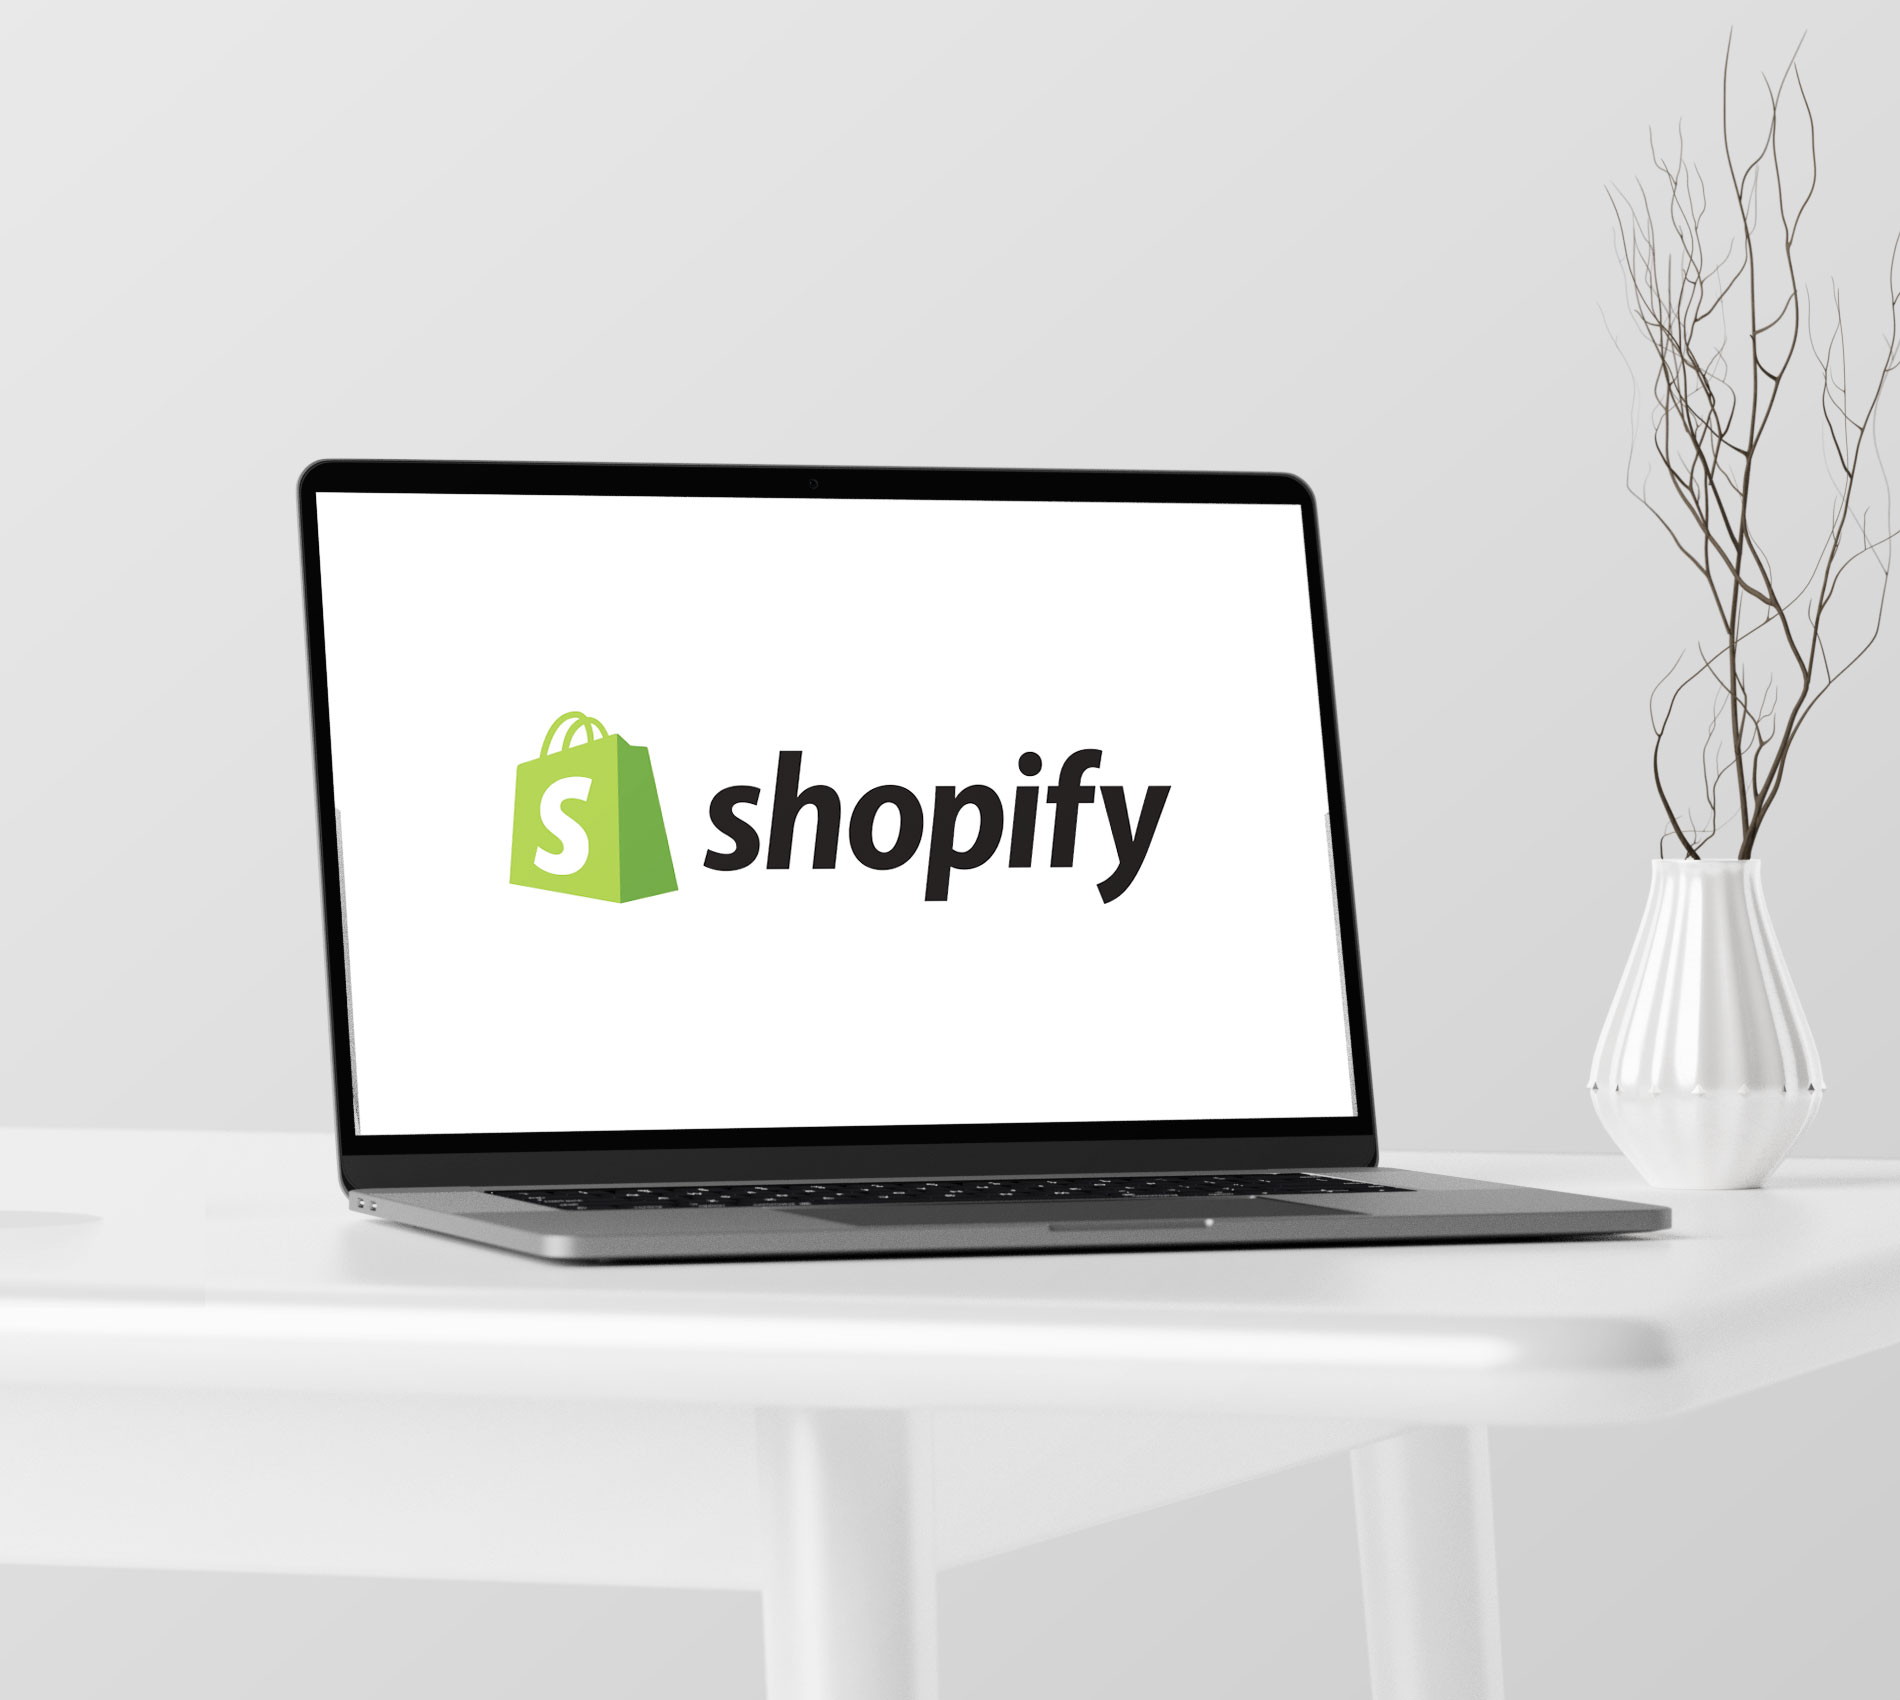 PagBrasil Offers Discount per Payment Method for Shopify